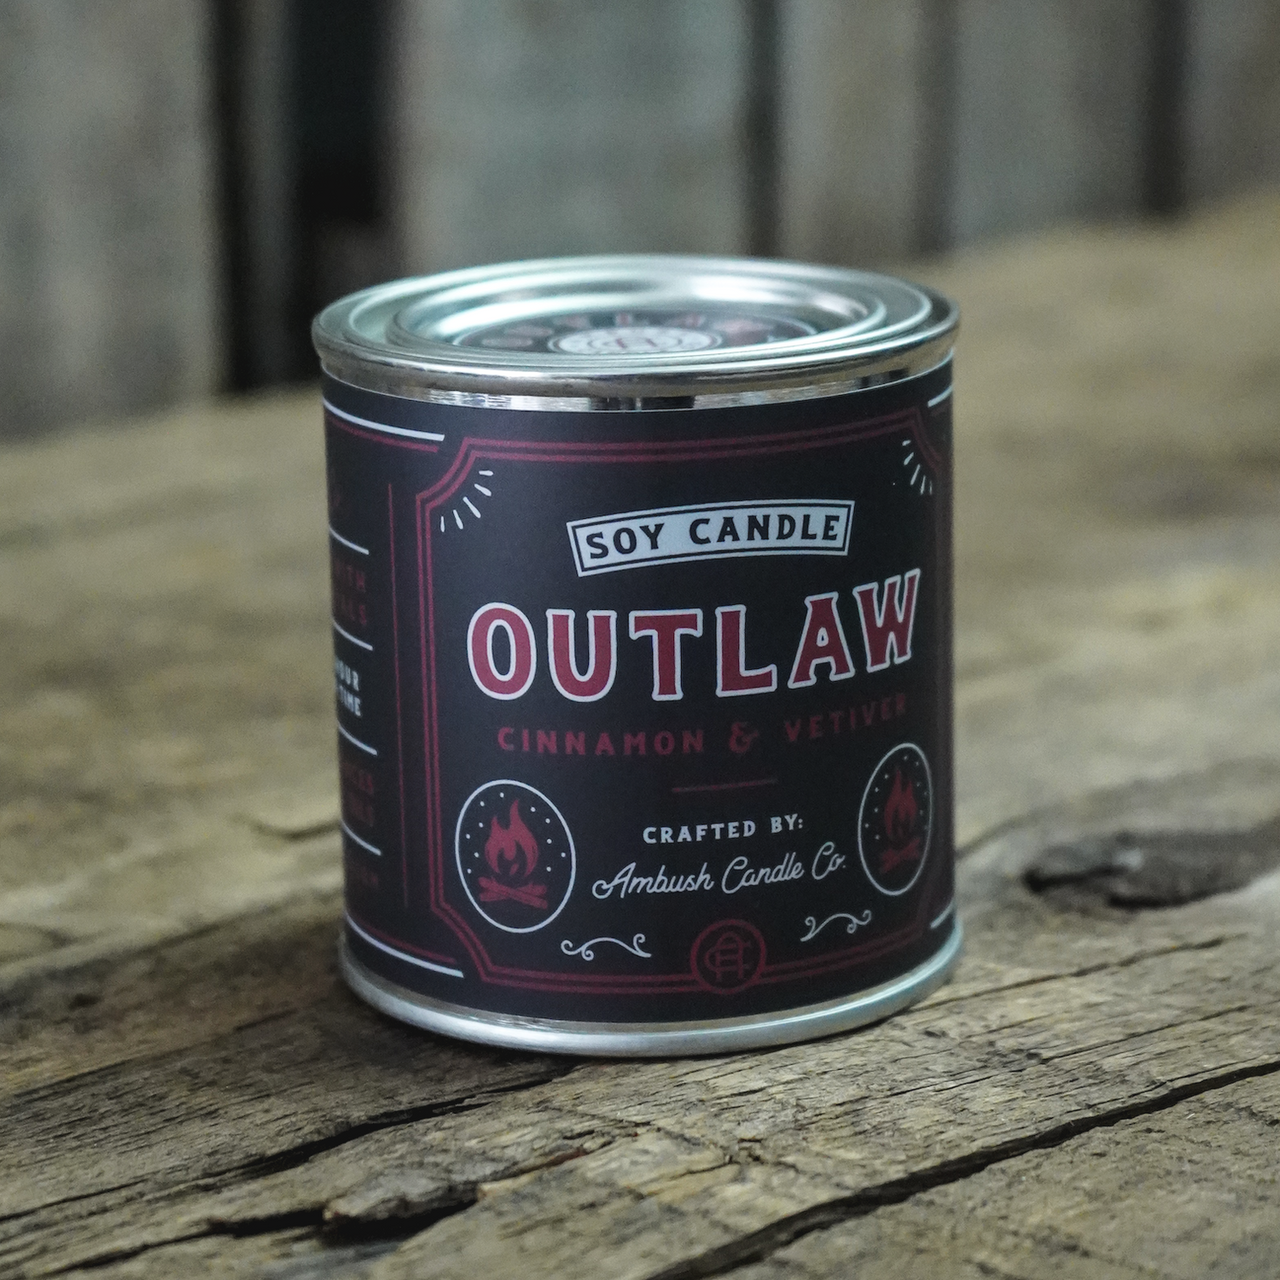 Outlaw - Cinnamon + Vetiver Soy Candle